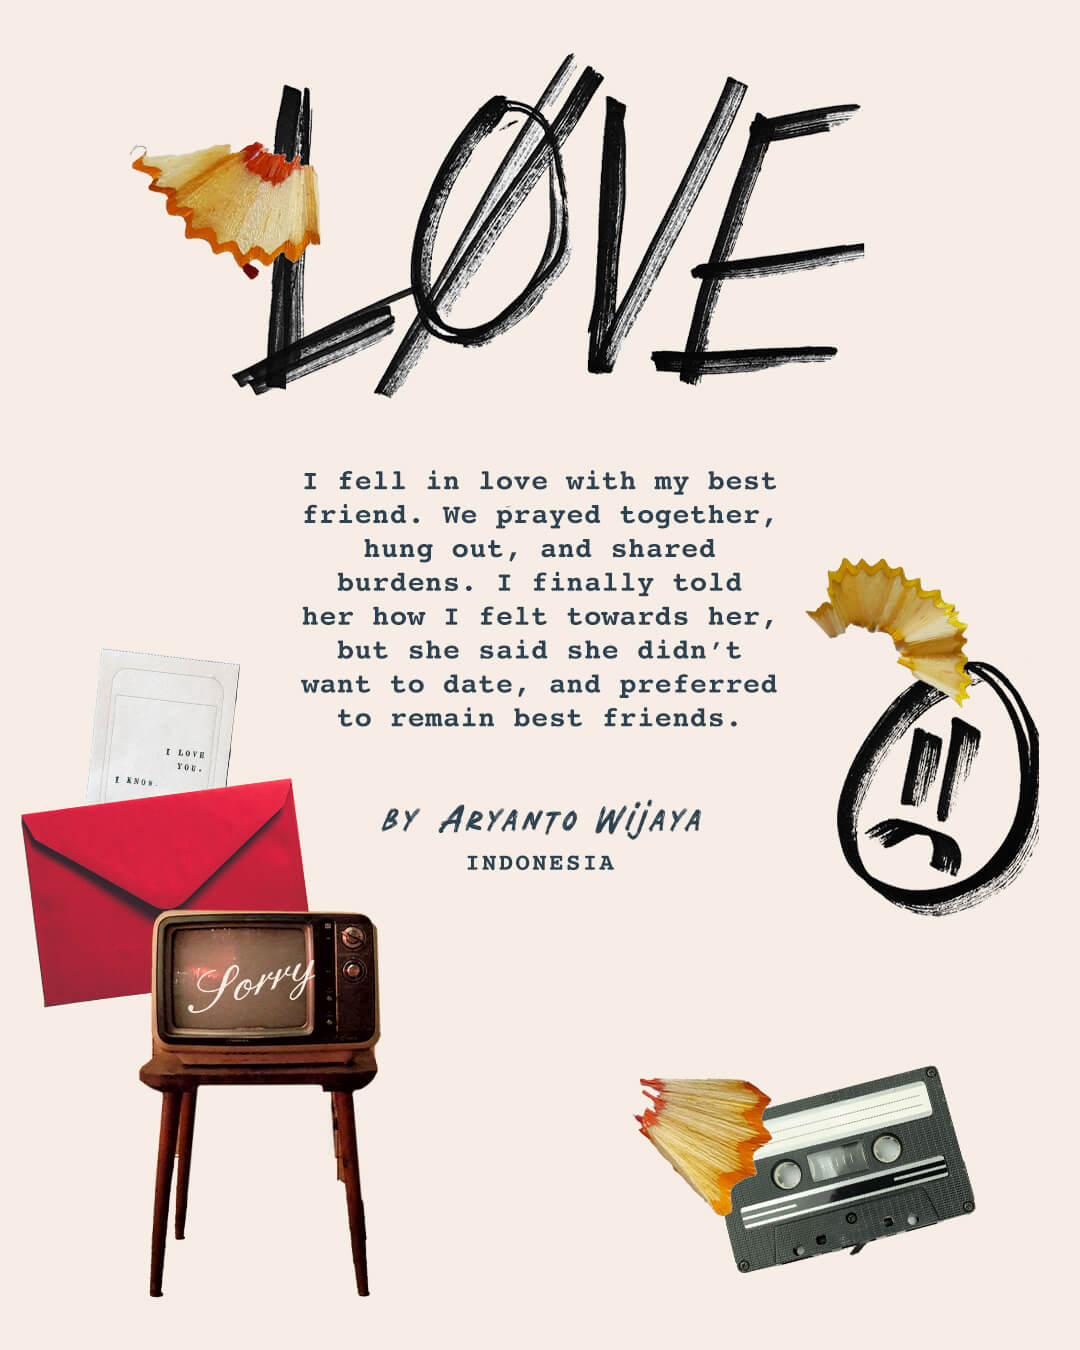 Image of love letter, cassette tape and a old retro tv